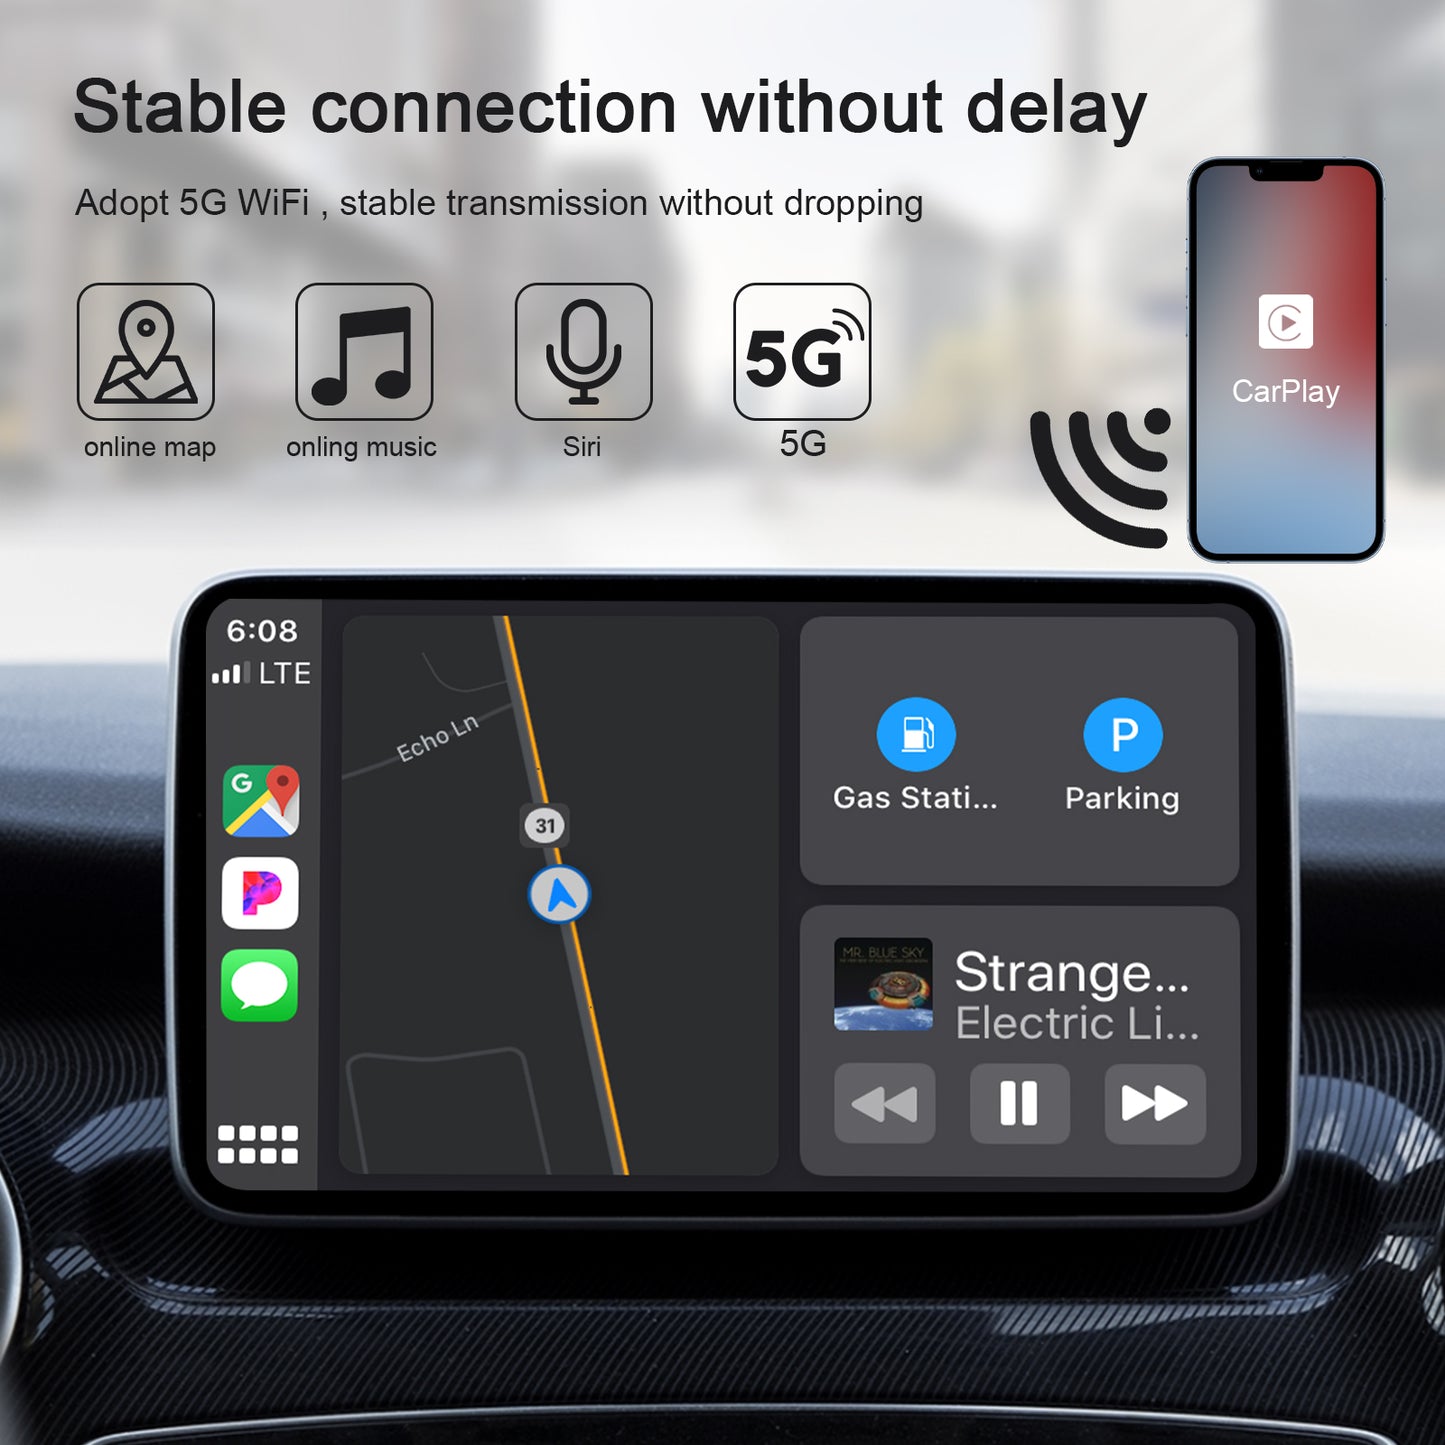 EXPLOTER CP-800-W16 Wired CarPlay Convert to Wireless CarPlay Wi-Fi 2.4GHz and 5GHz Automatically connect